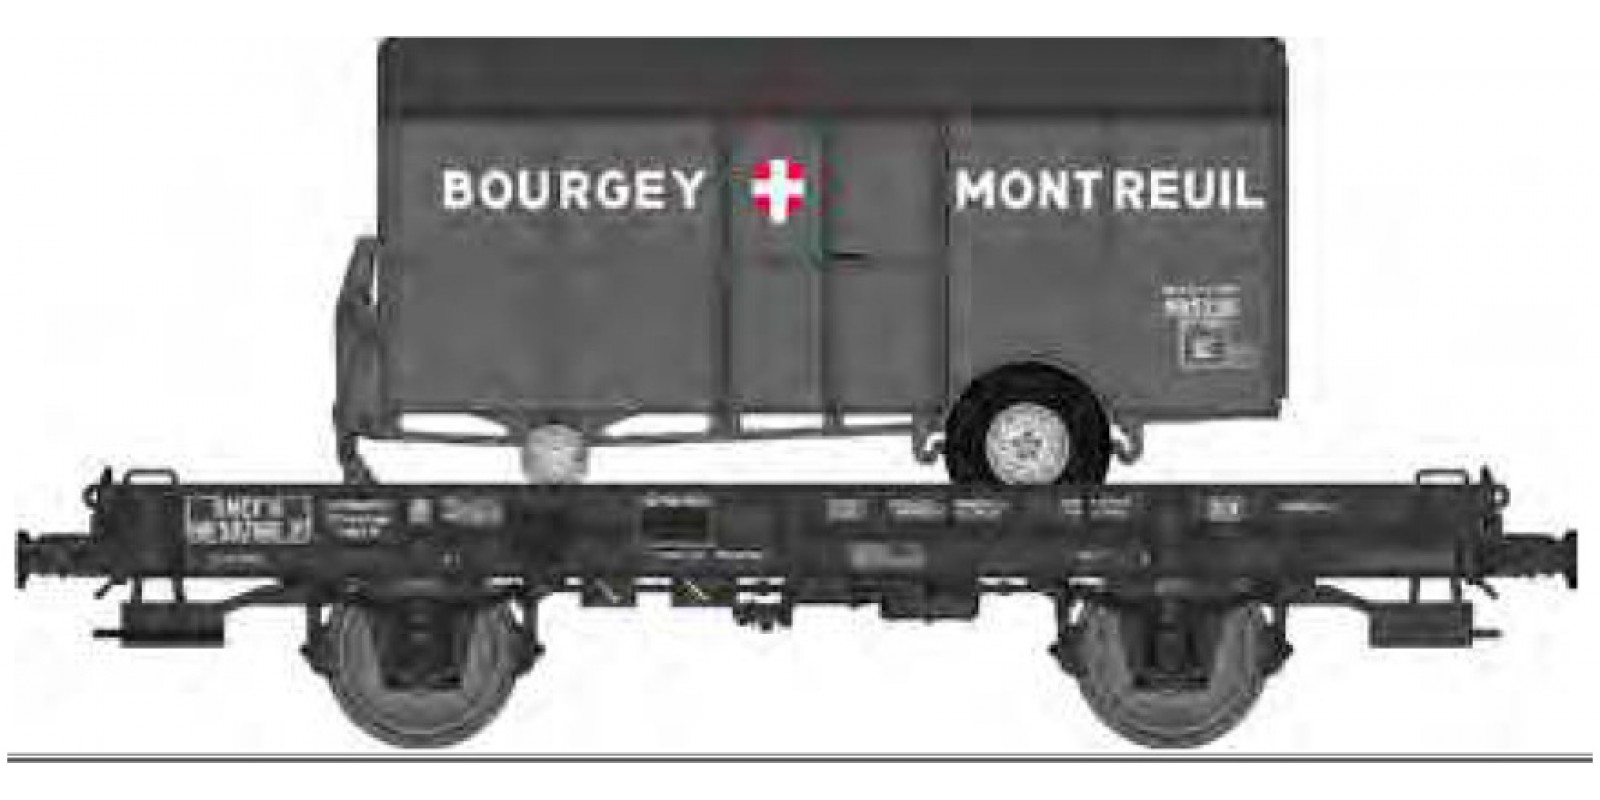 REWB647 Heavy truck loaded with tank trailer of the SNCF